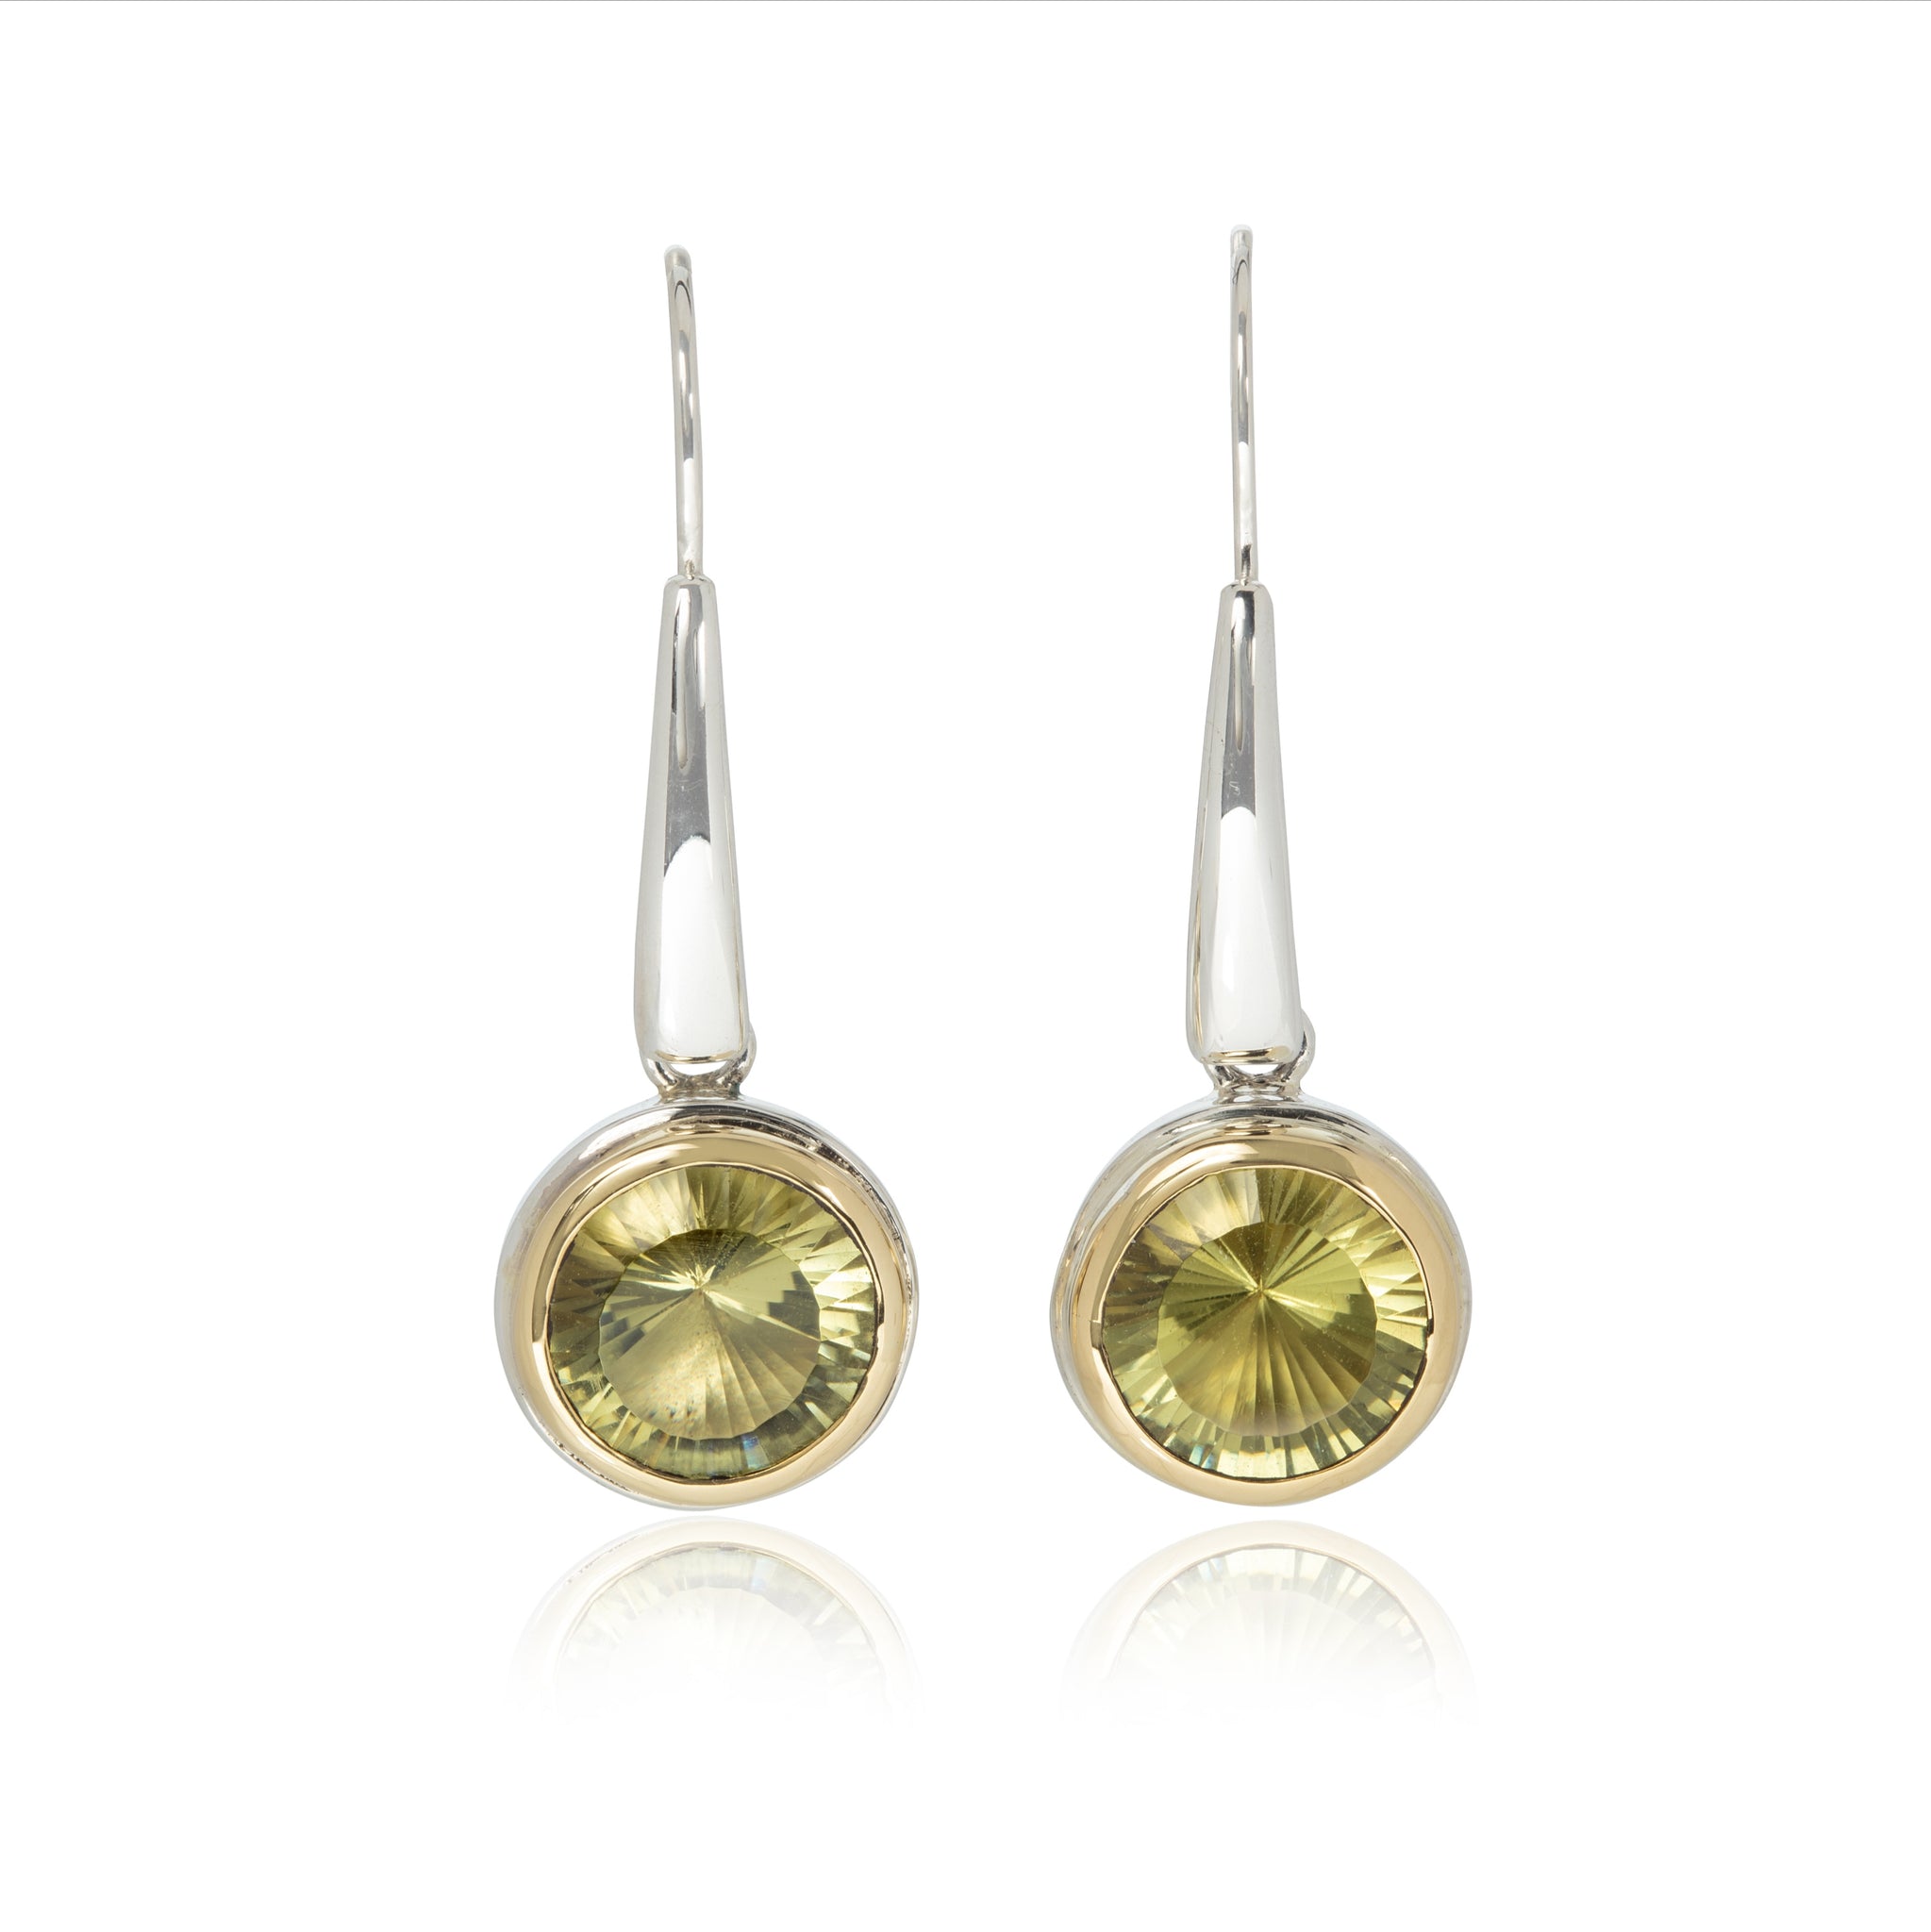 Stunning Concave cut Citrine Earrings in 22ct Gold & Sterling Silver